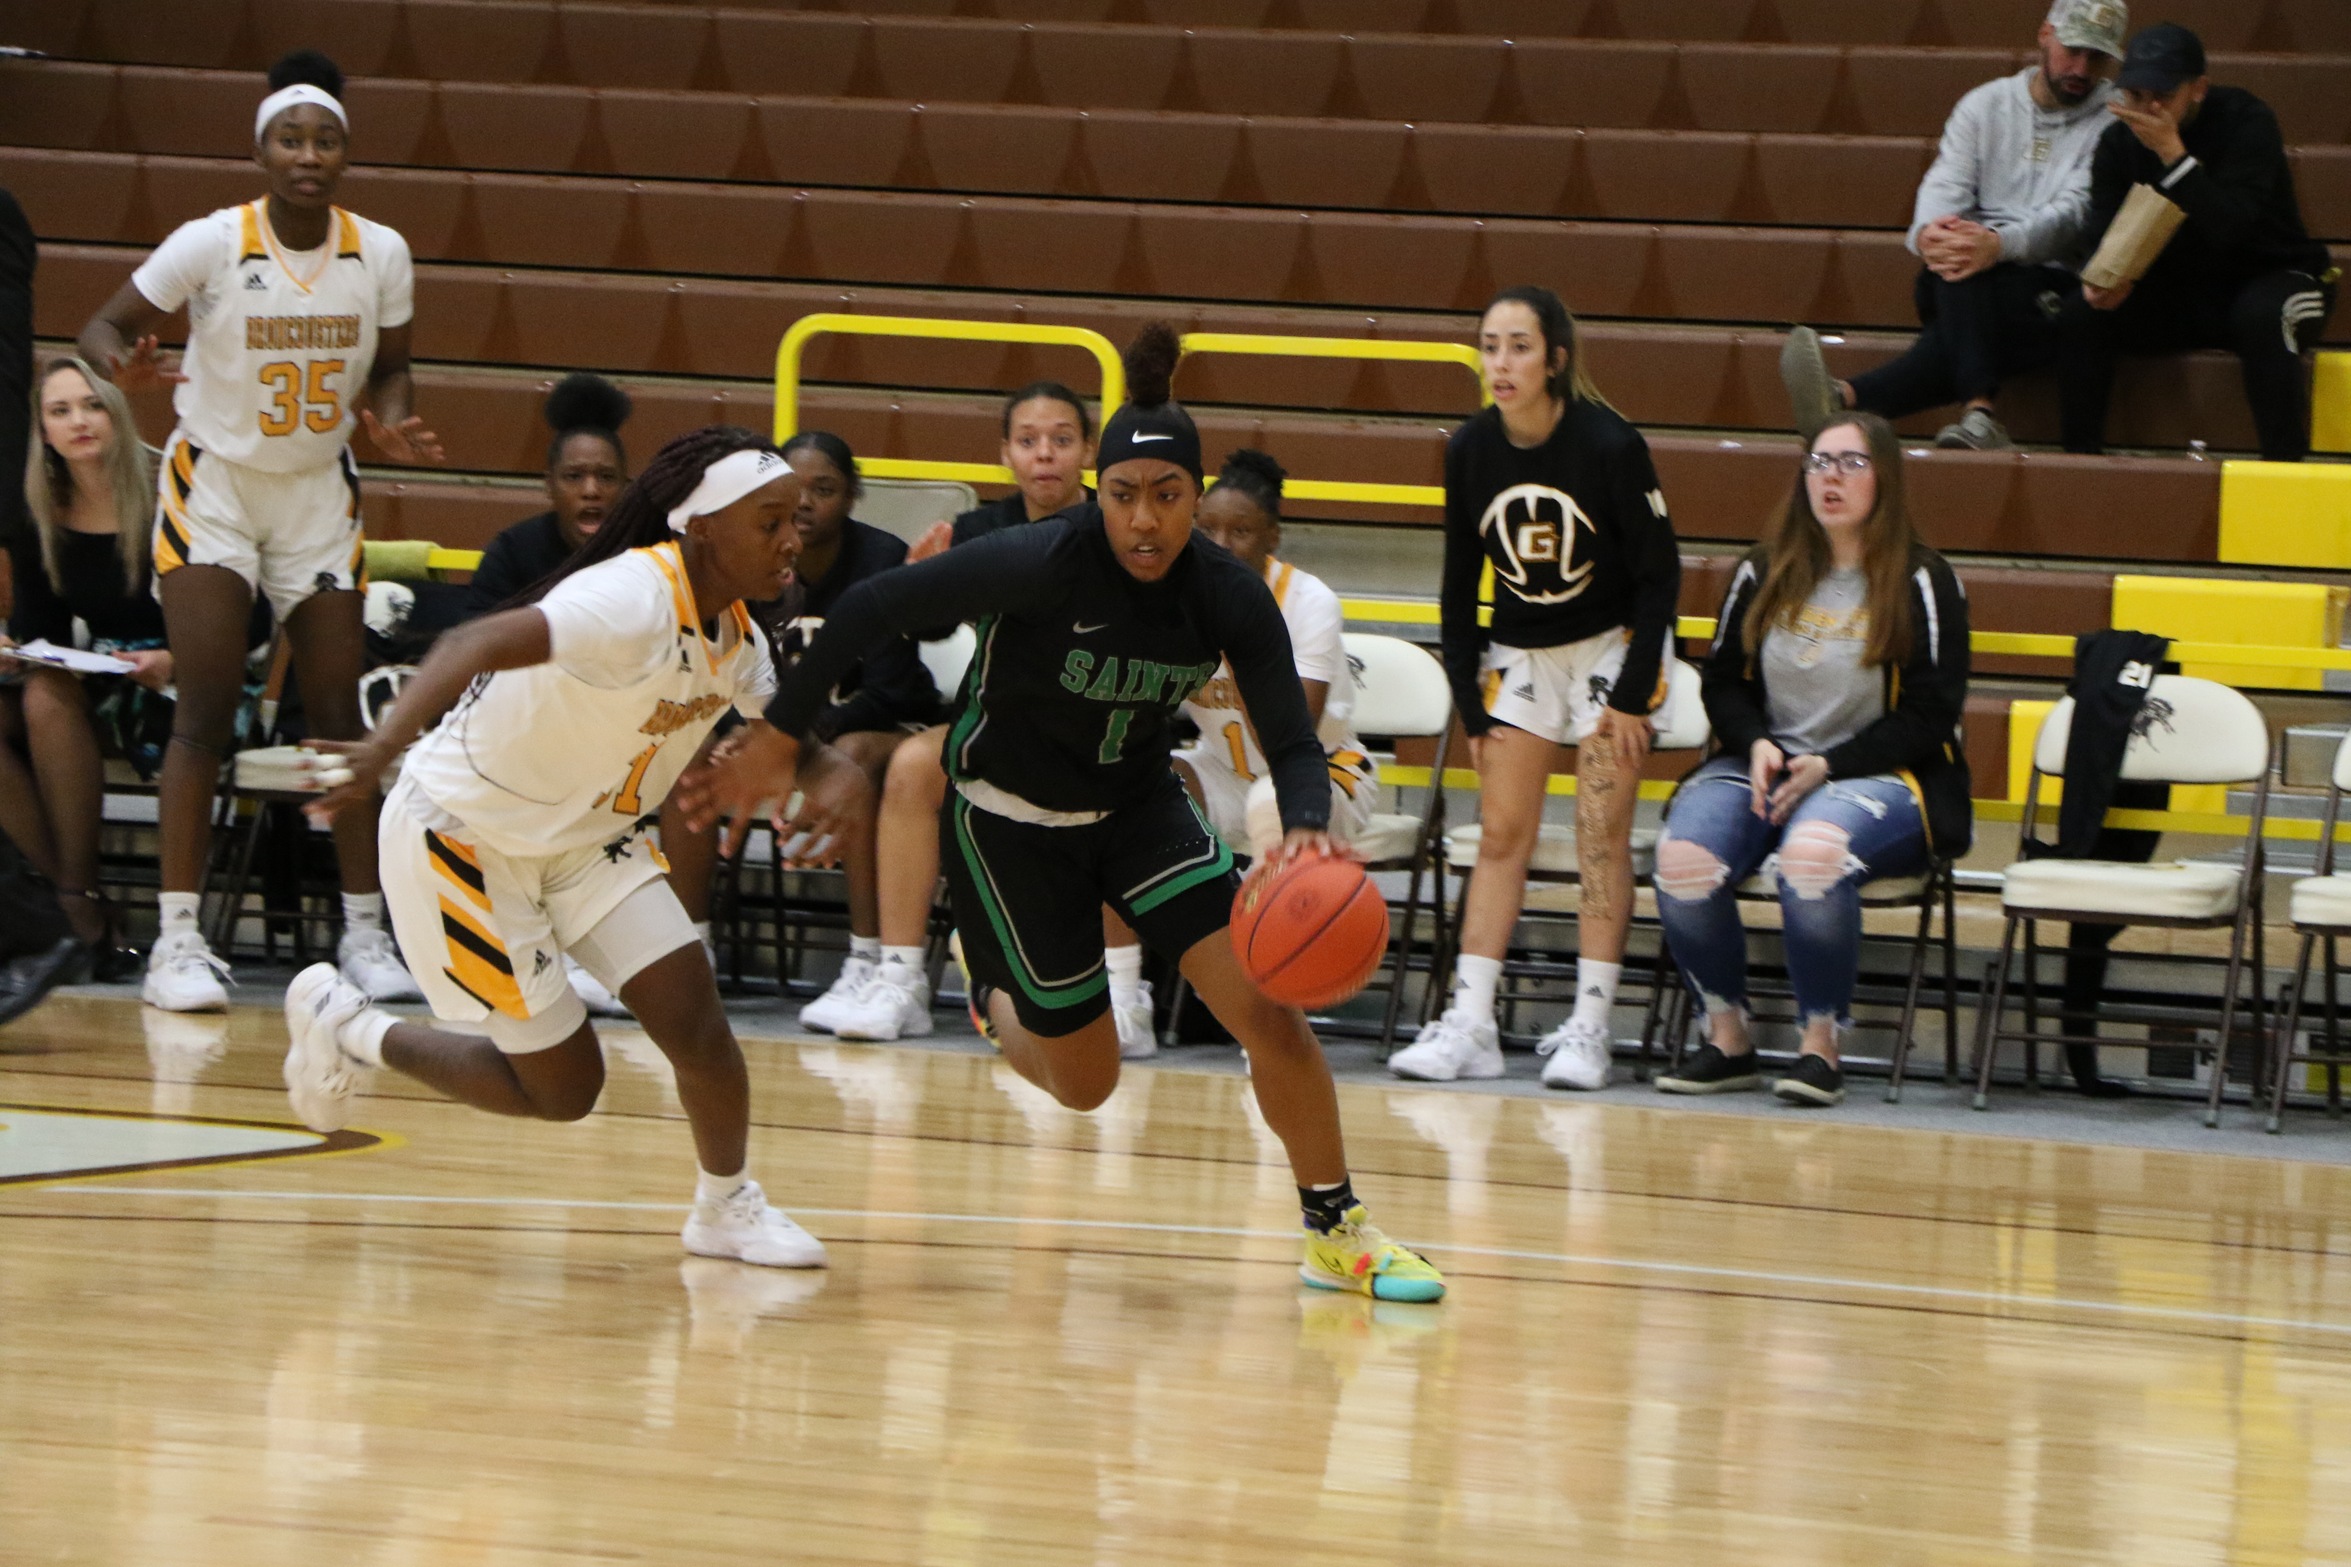 The Lady Saints fall 71-68 to the Broncbusters